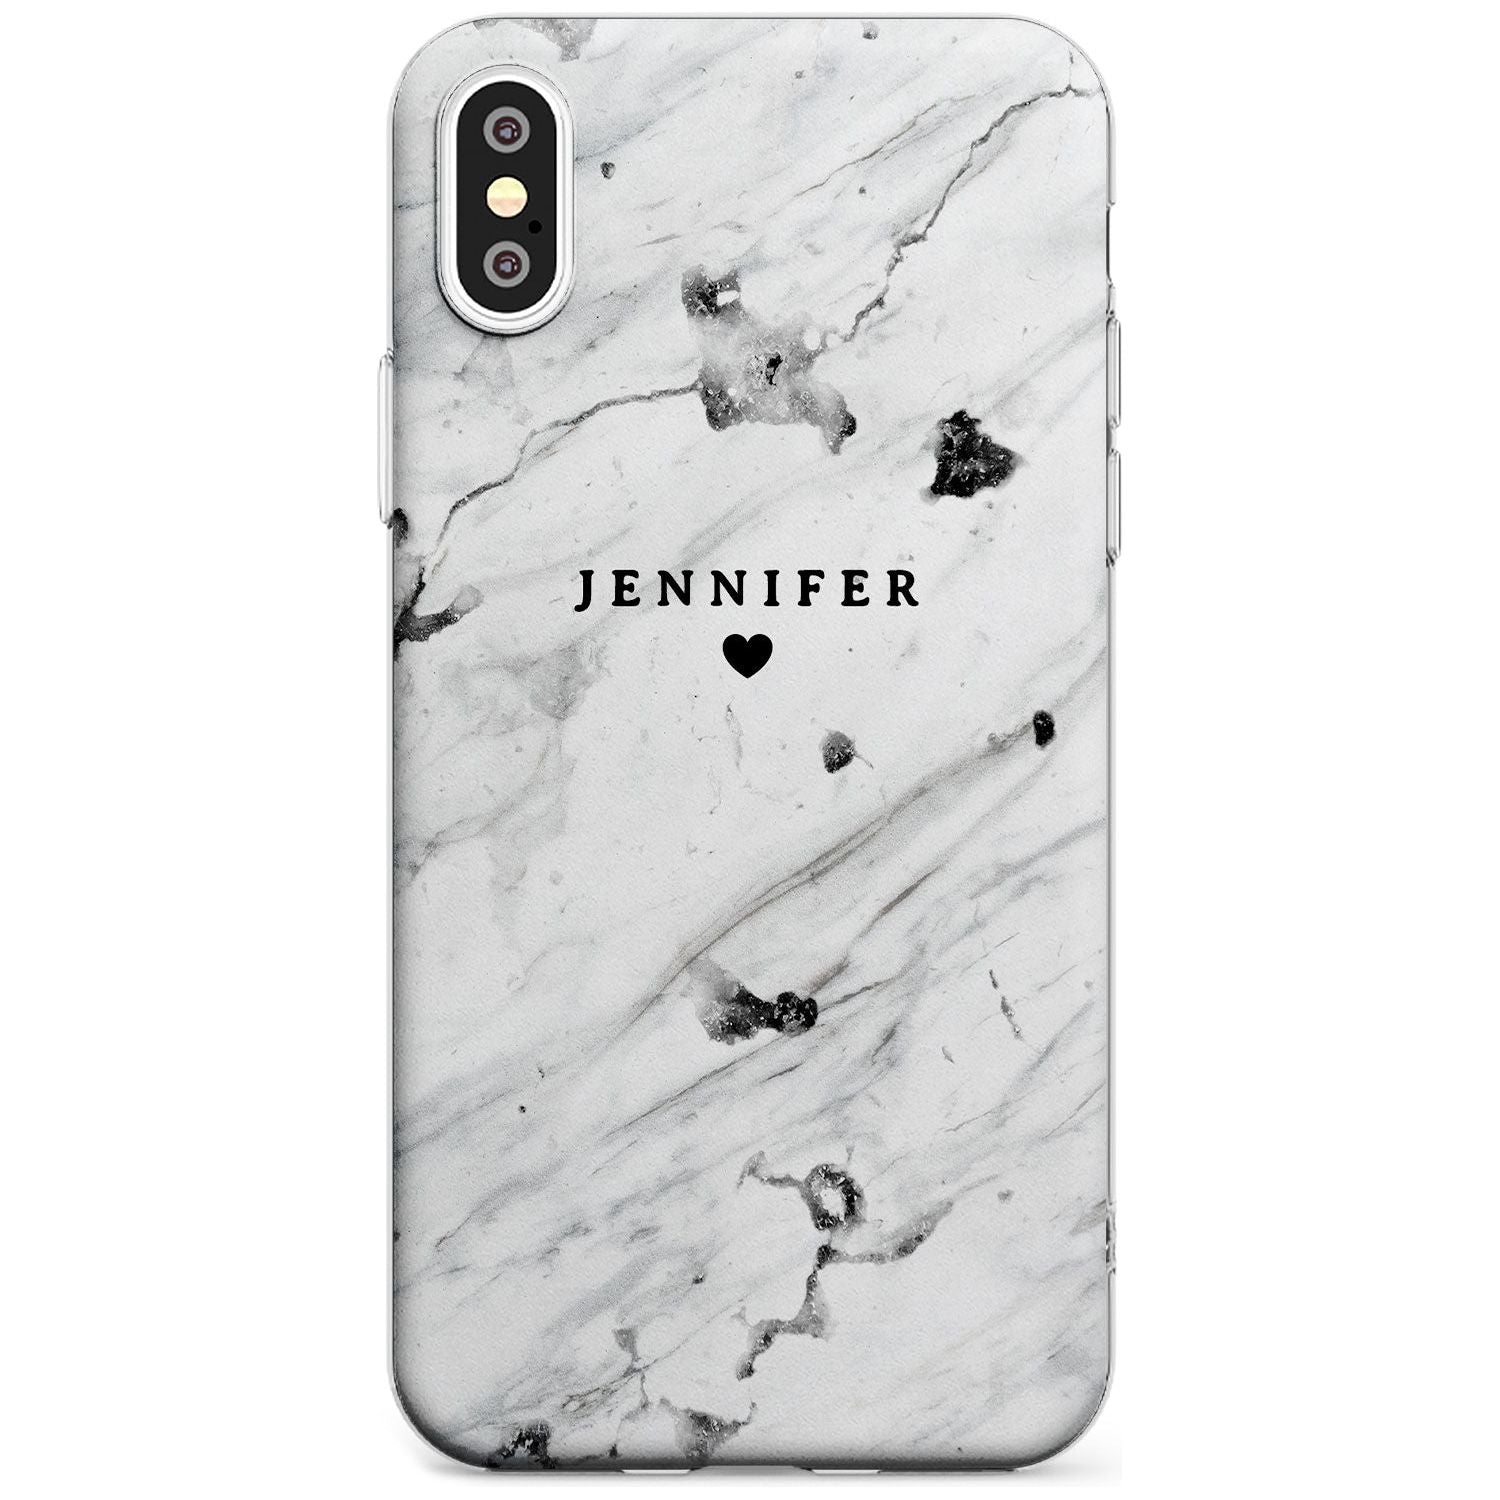 Personalised Black & White Marble Black Impact Phone Case for iPhone X XS Max XR